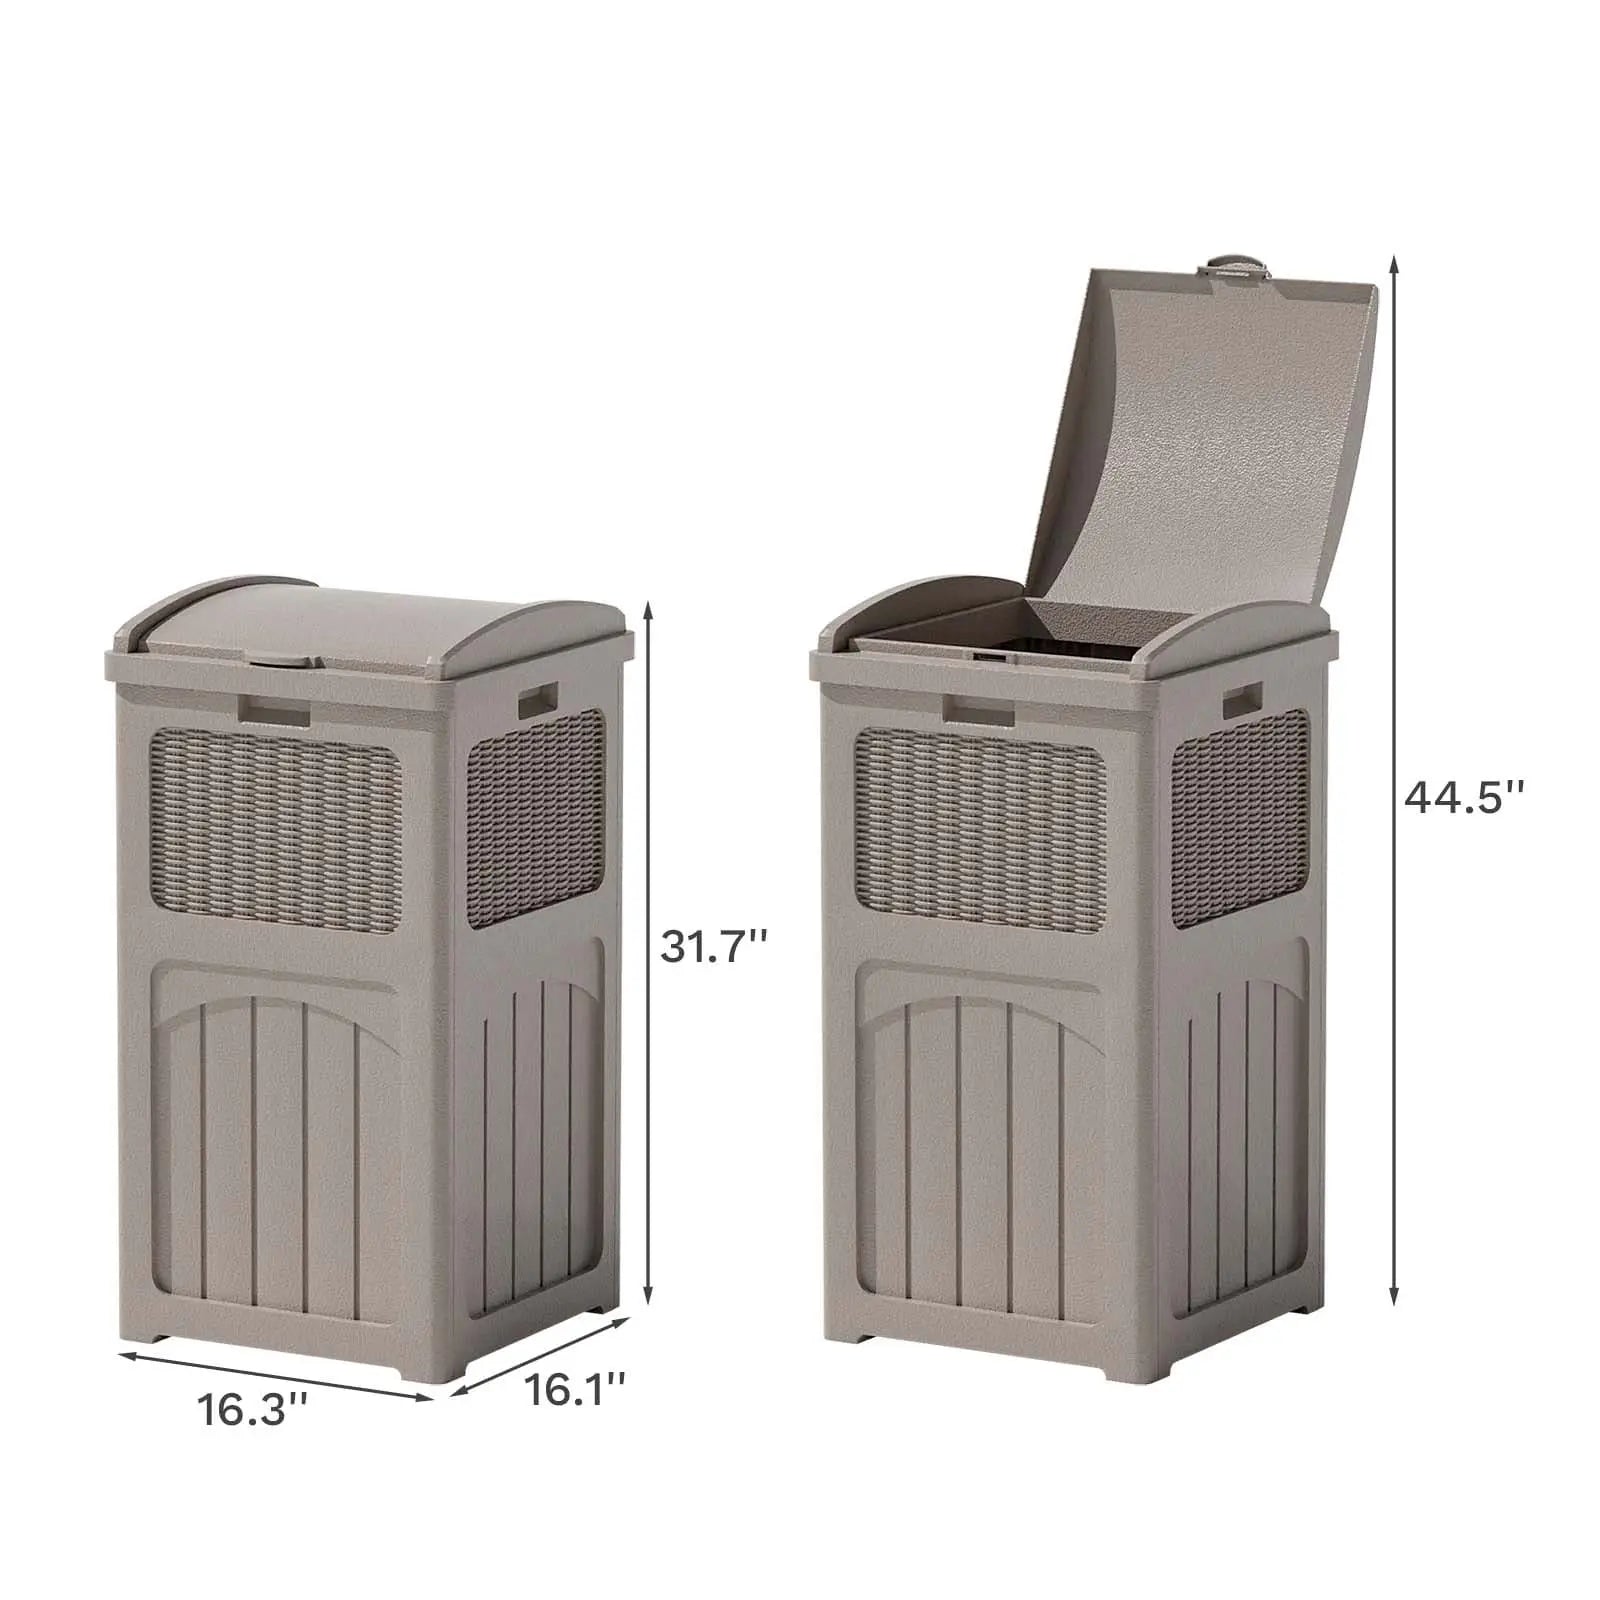 Patiowell 36 Gallon Resin Trash Can-Dimensions